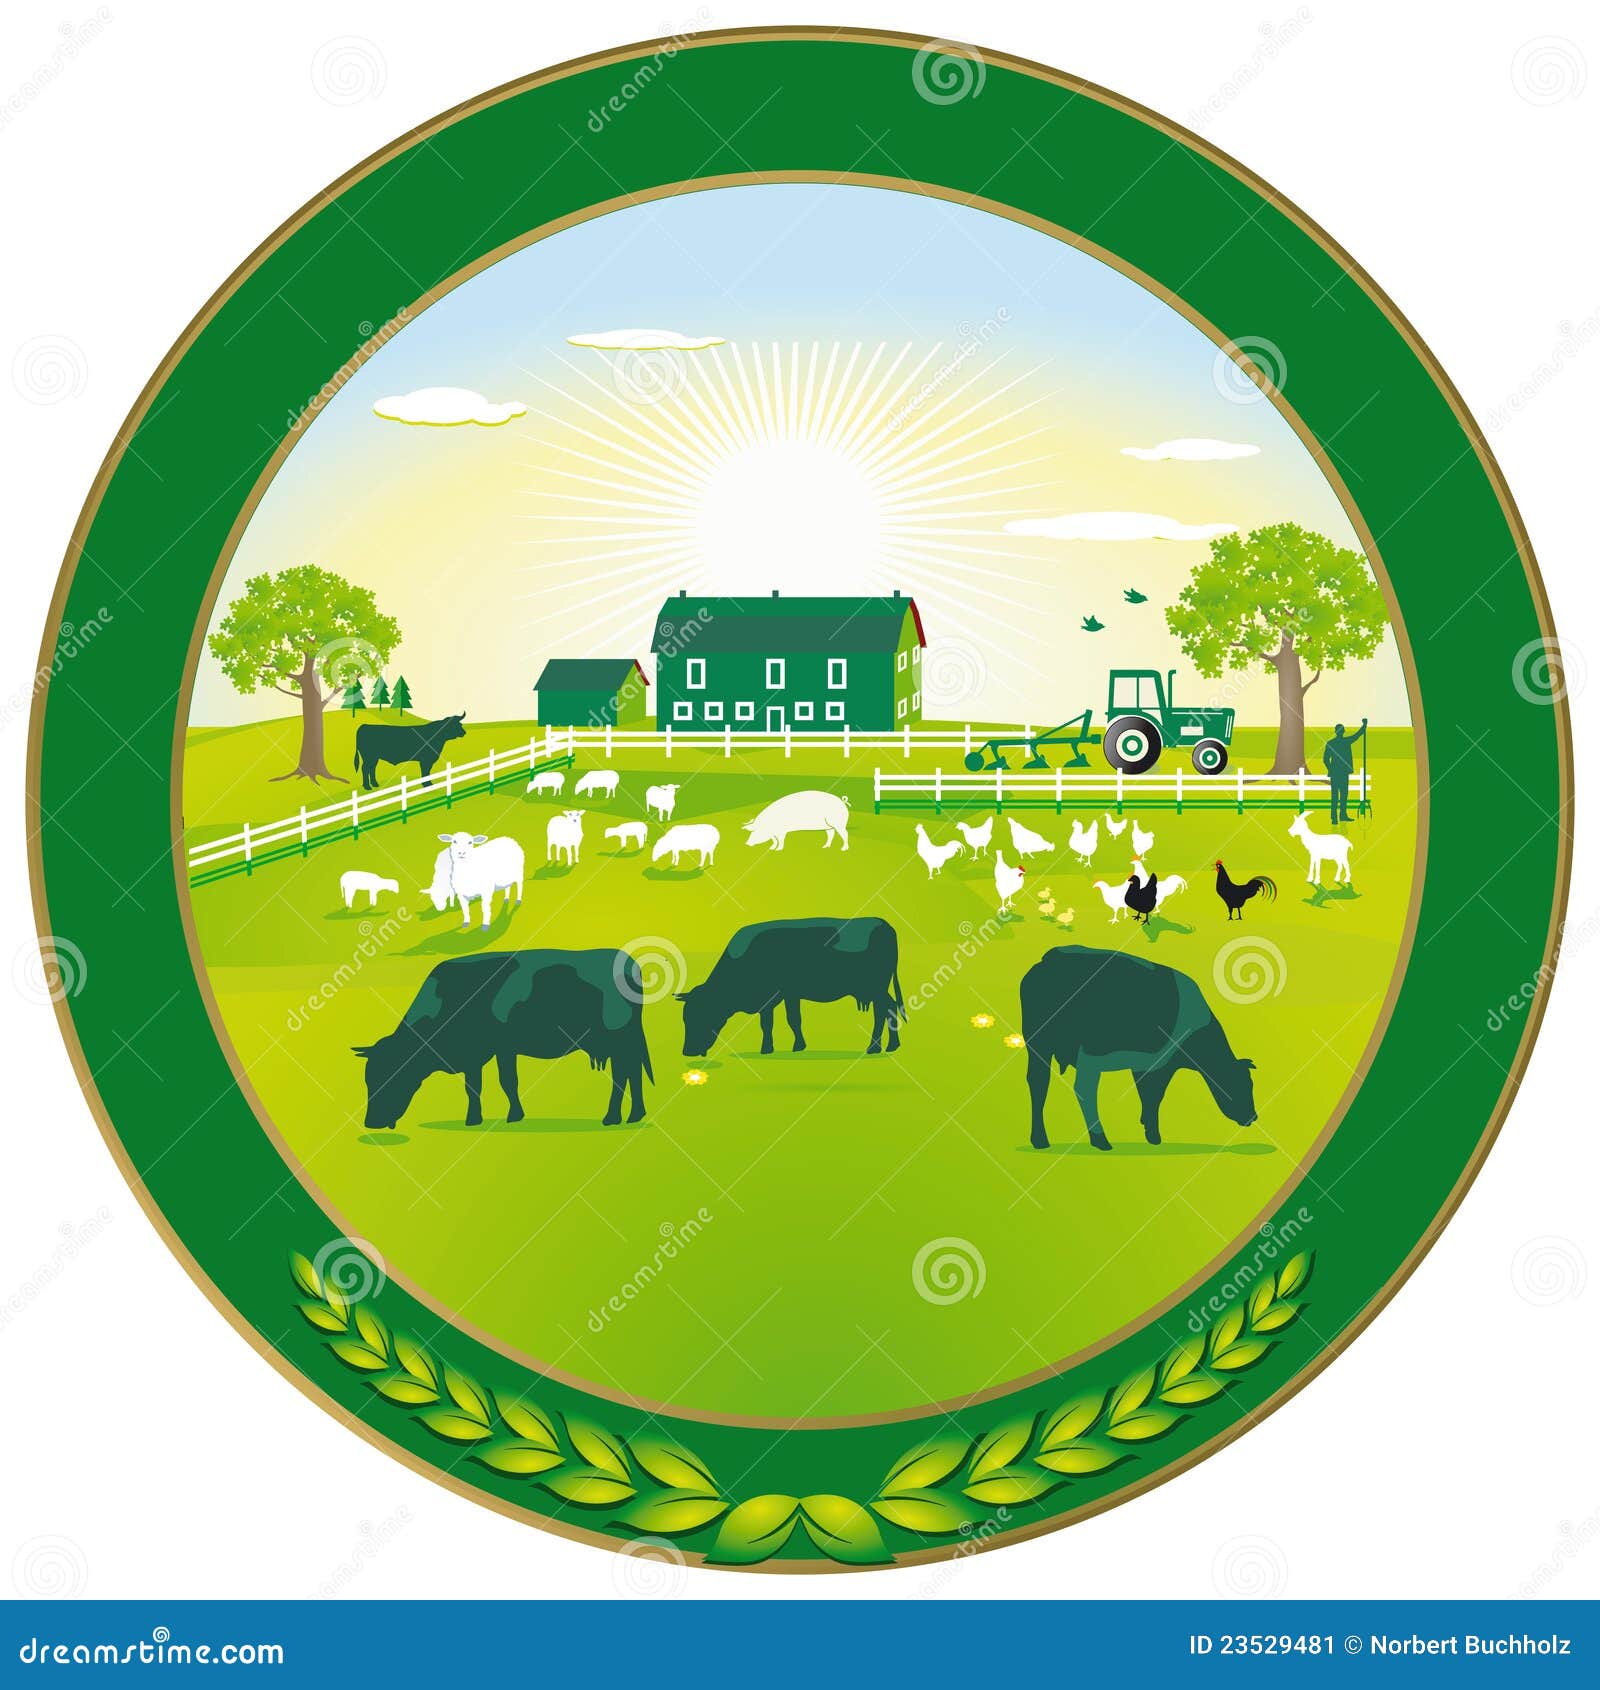 Green Agriculture Badge Stock Image - Image: 23529481